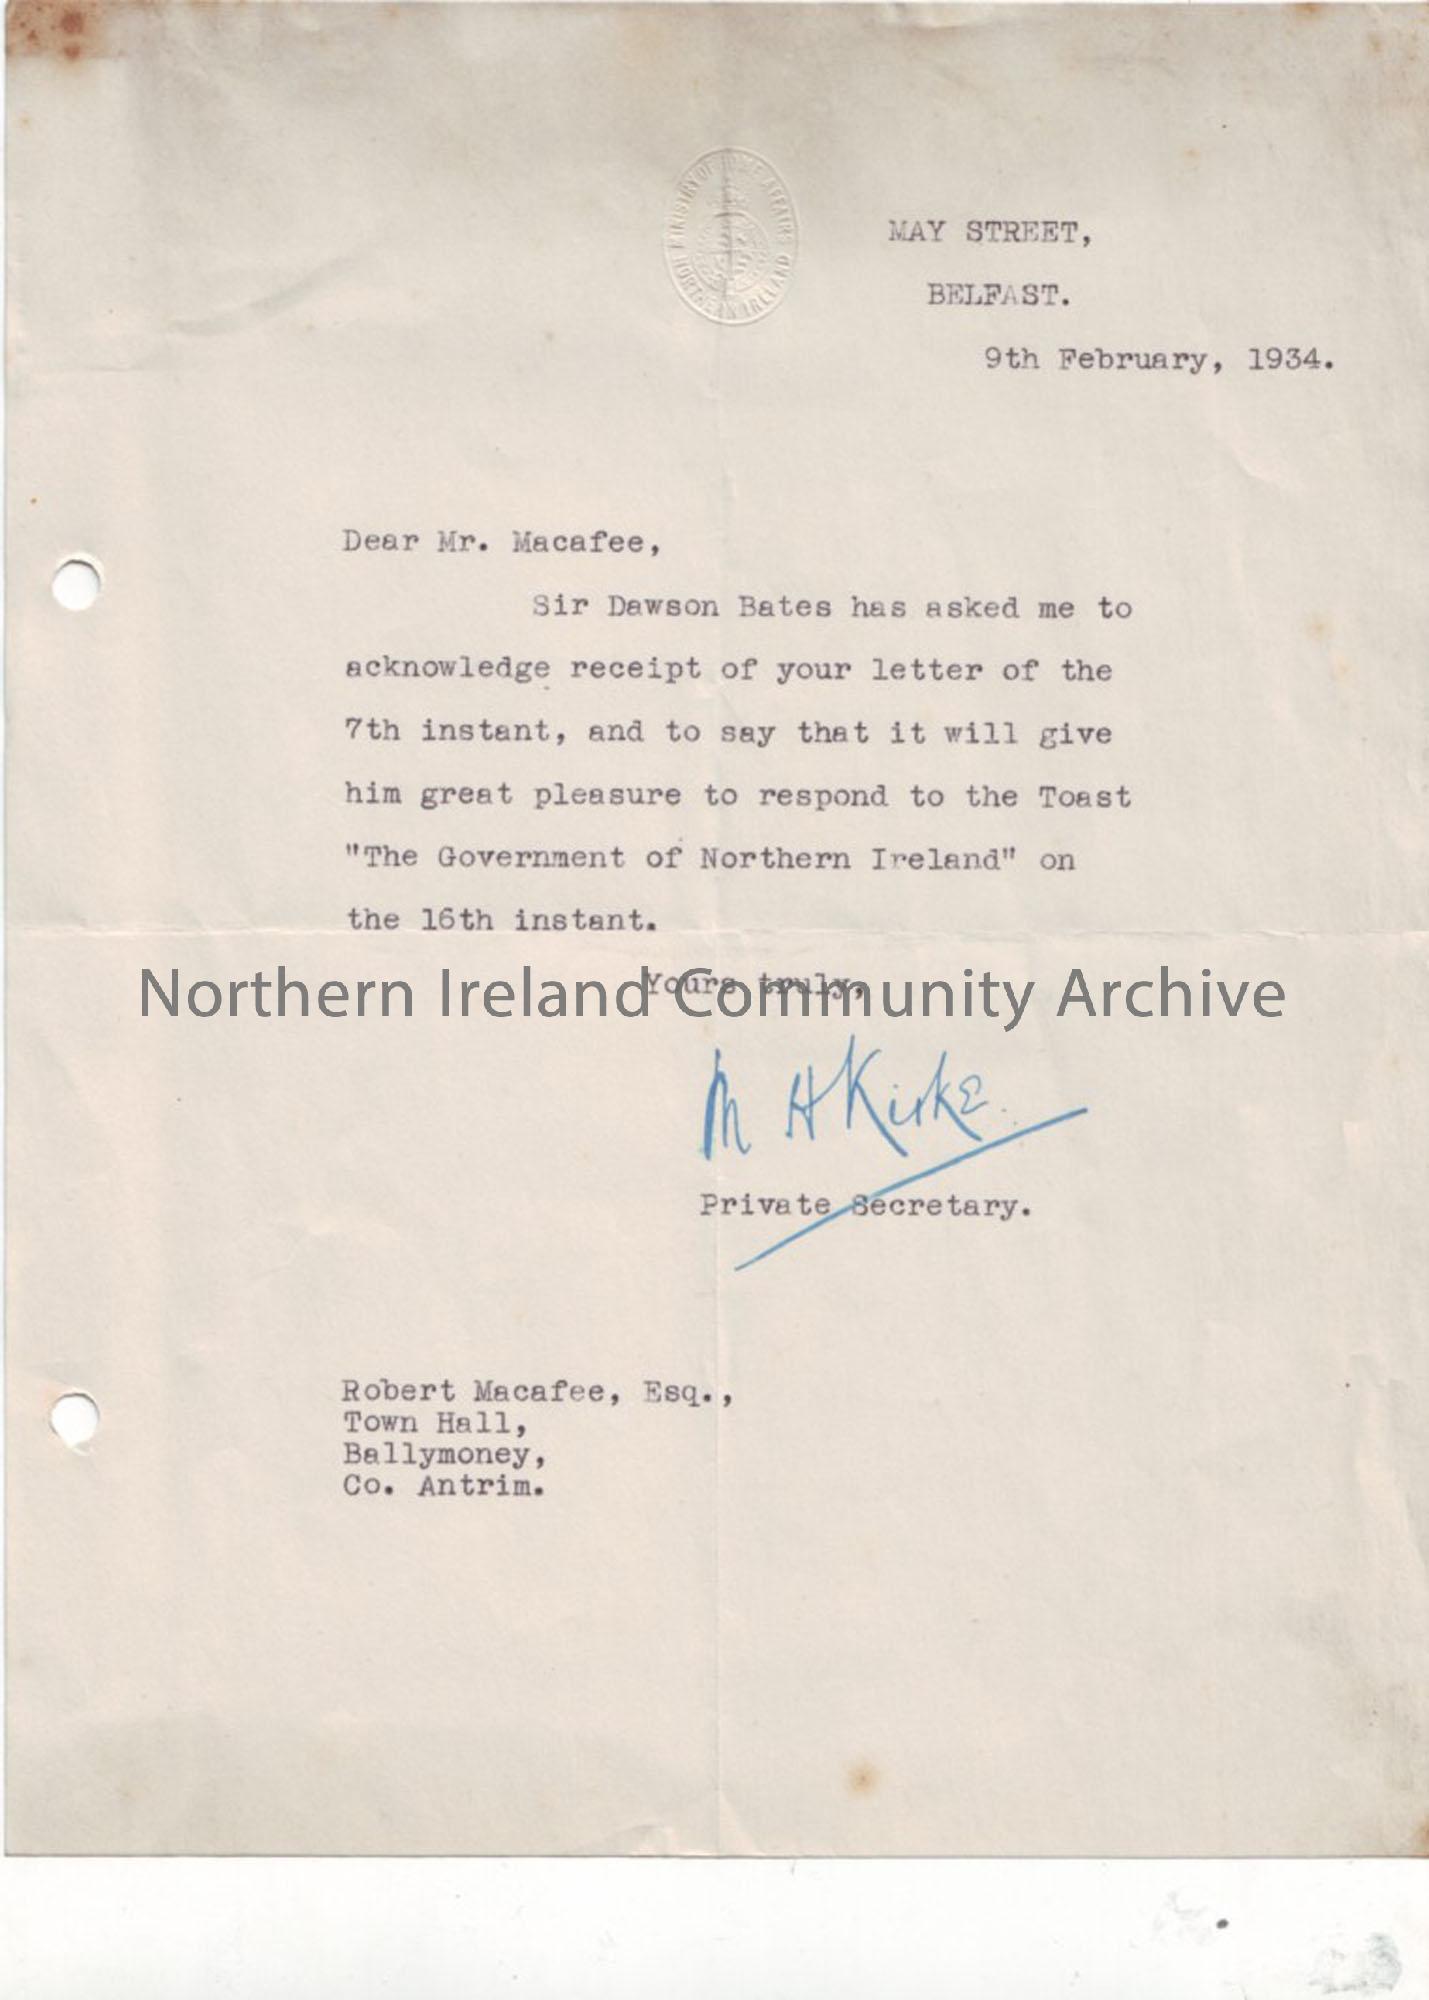 Letters accepting and responding to the invitation to toast at the re-opening of the Town Hall on Friday 16th February 1934